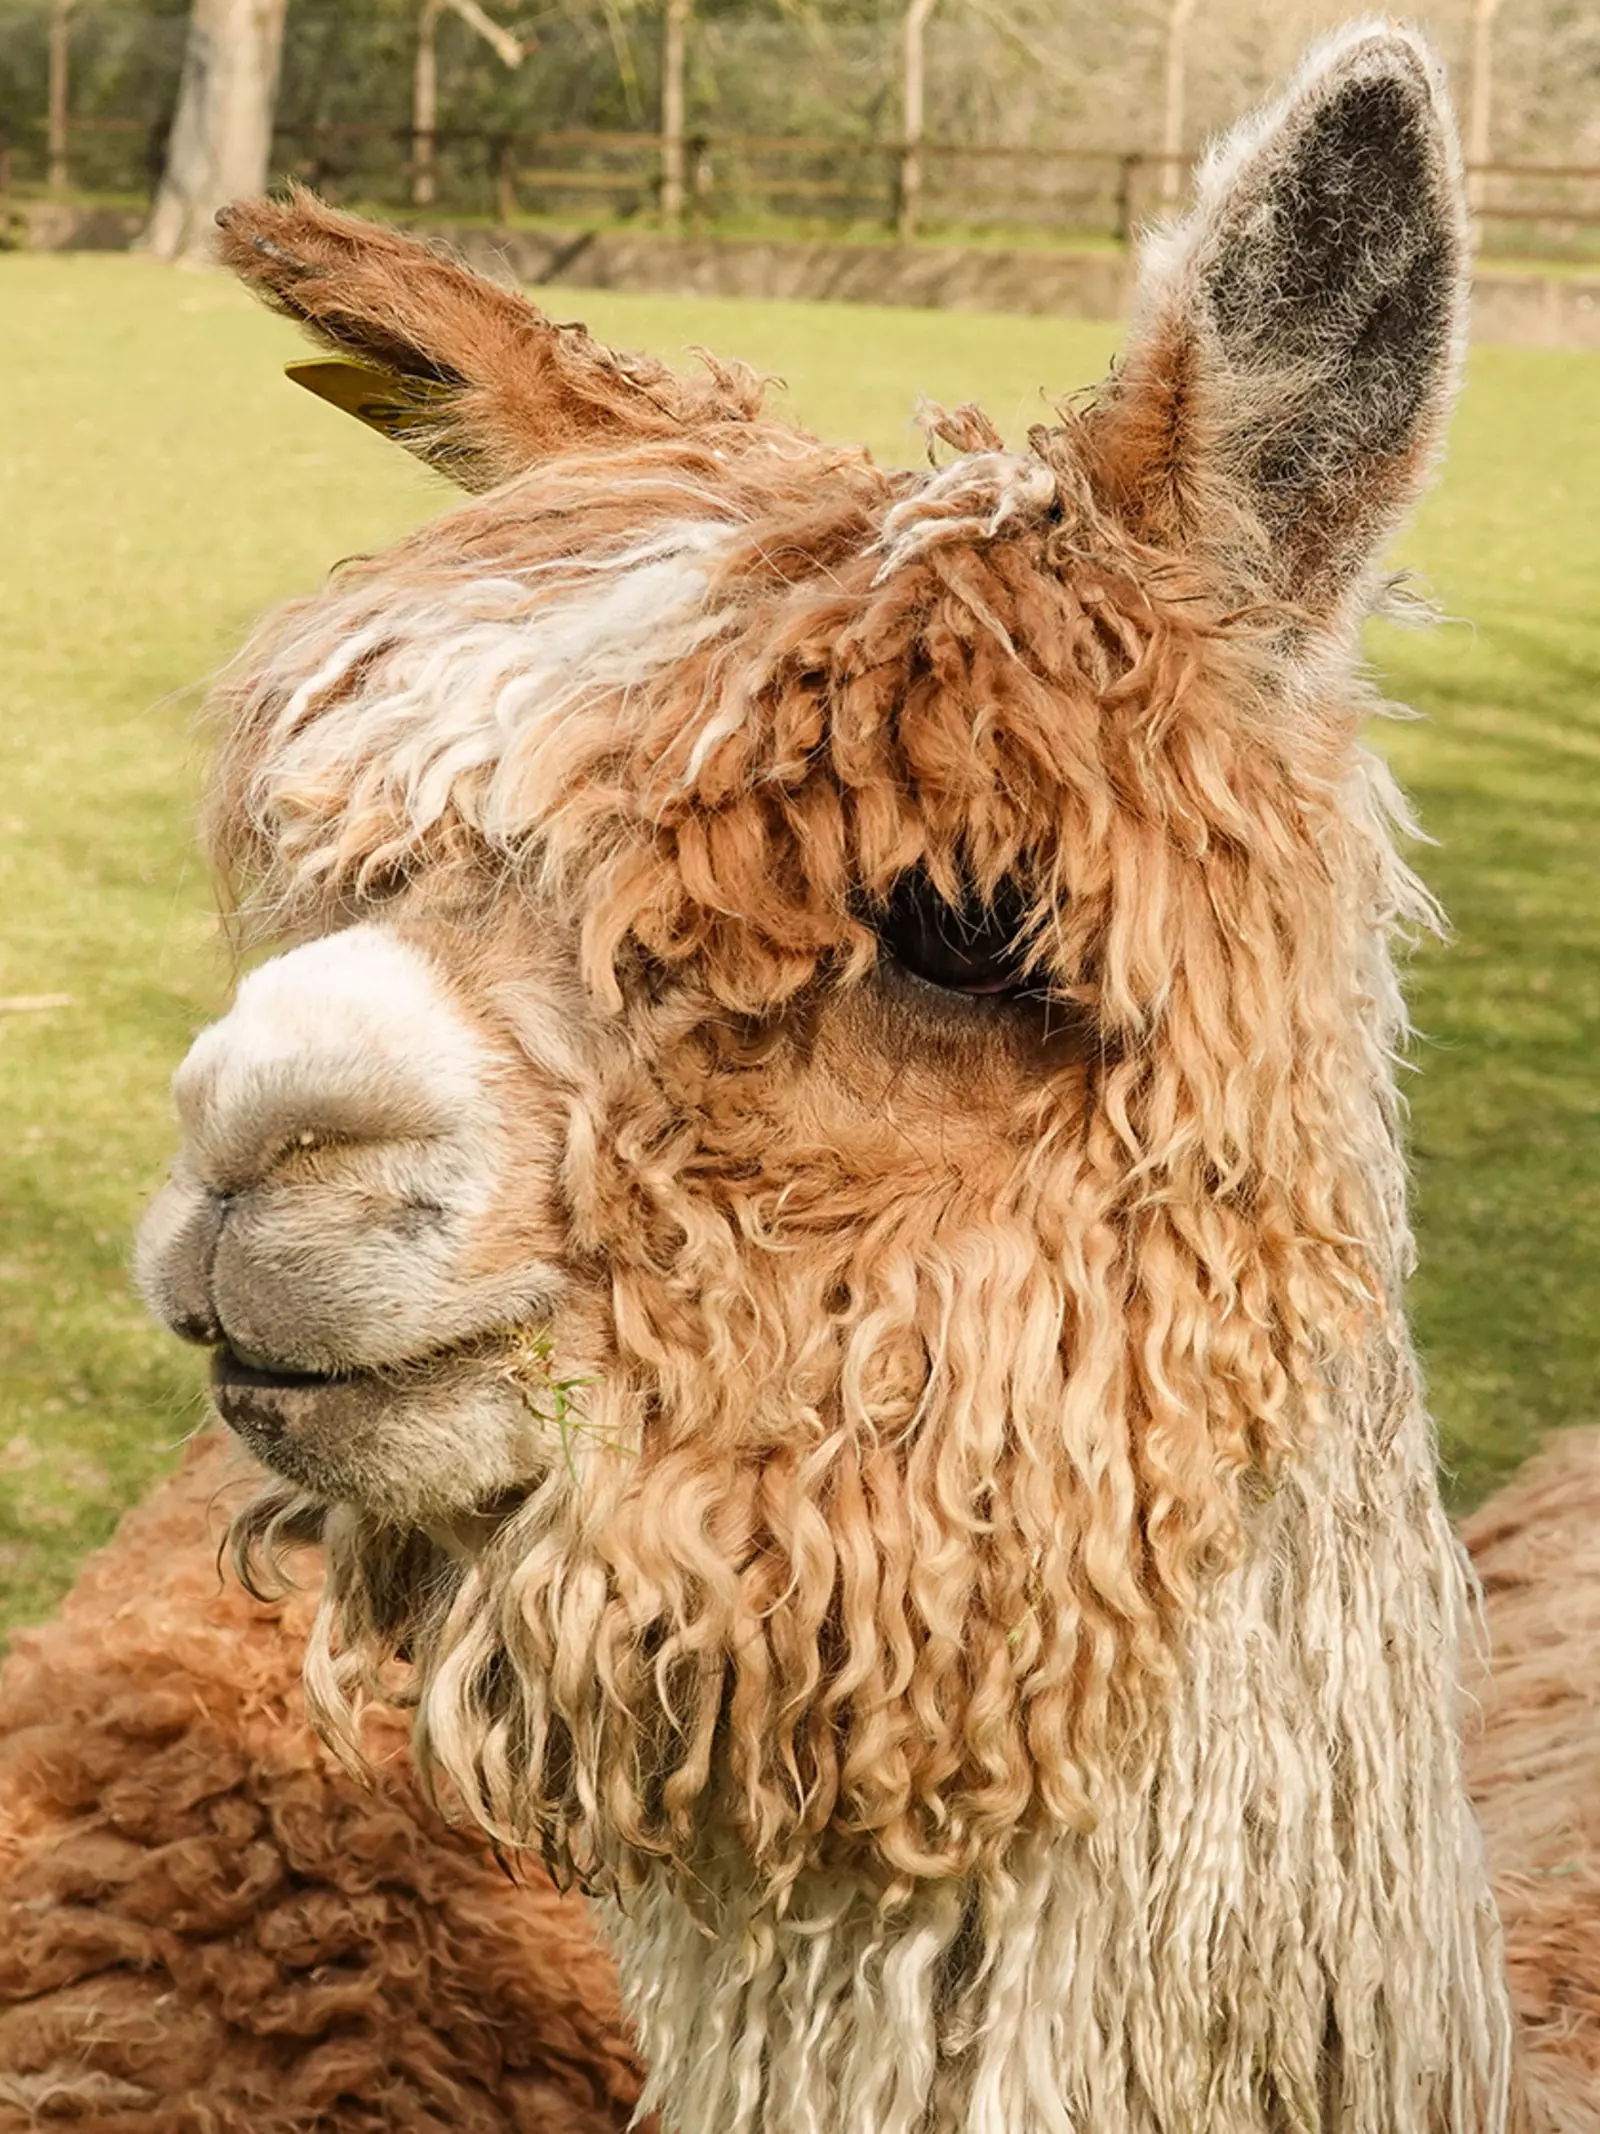 Lima the alpaca at Whipsnade Zoo